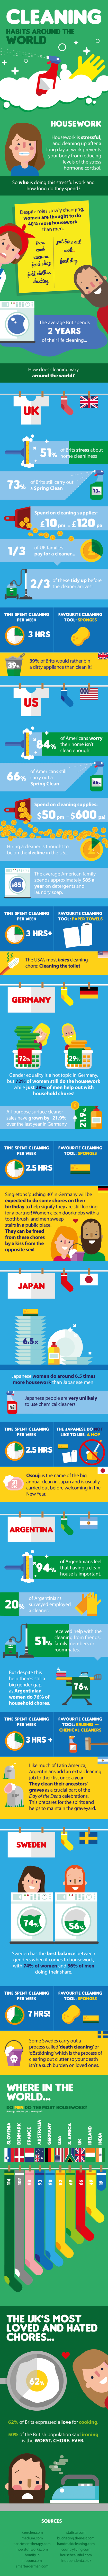 Cleaning Habits Around The World